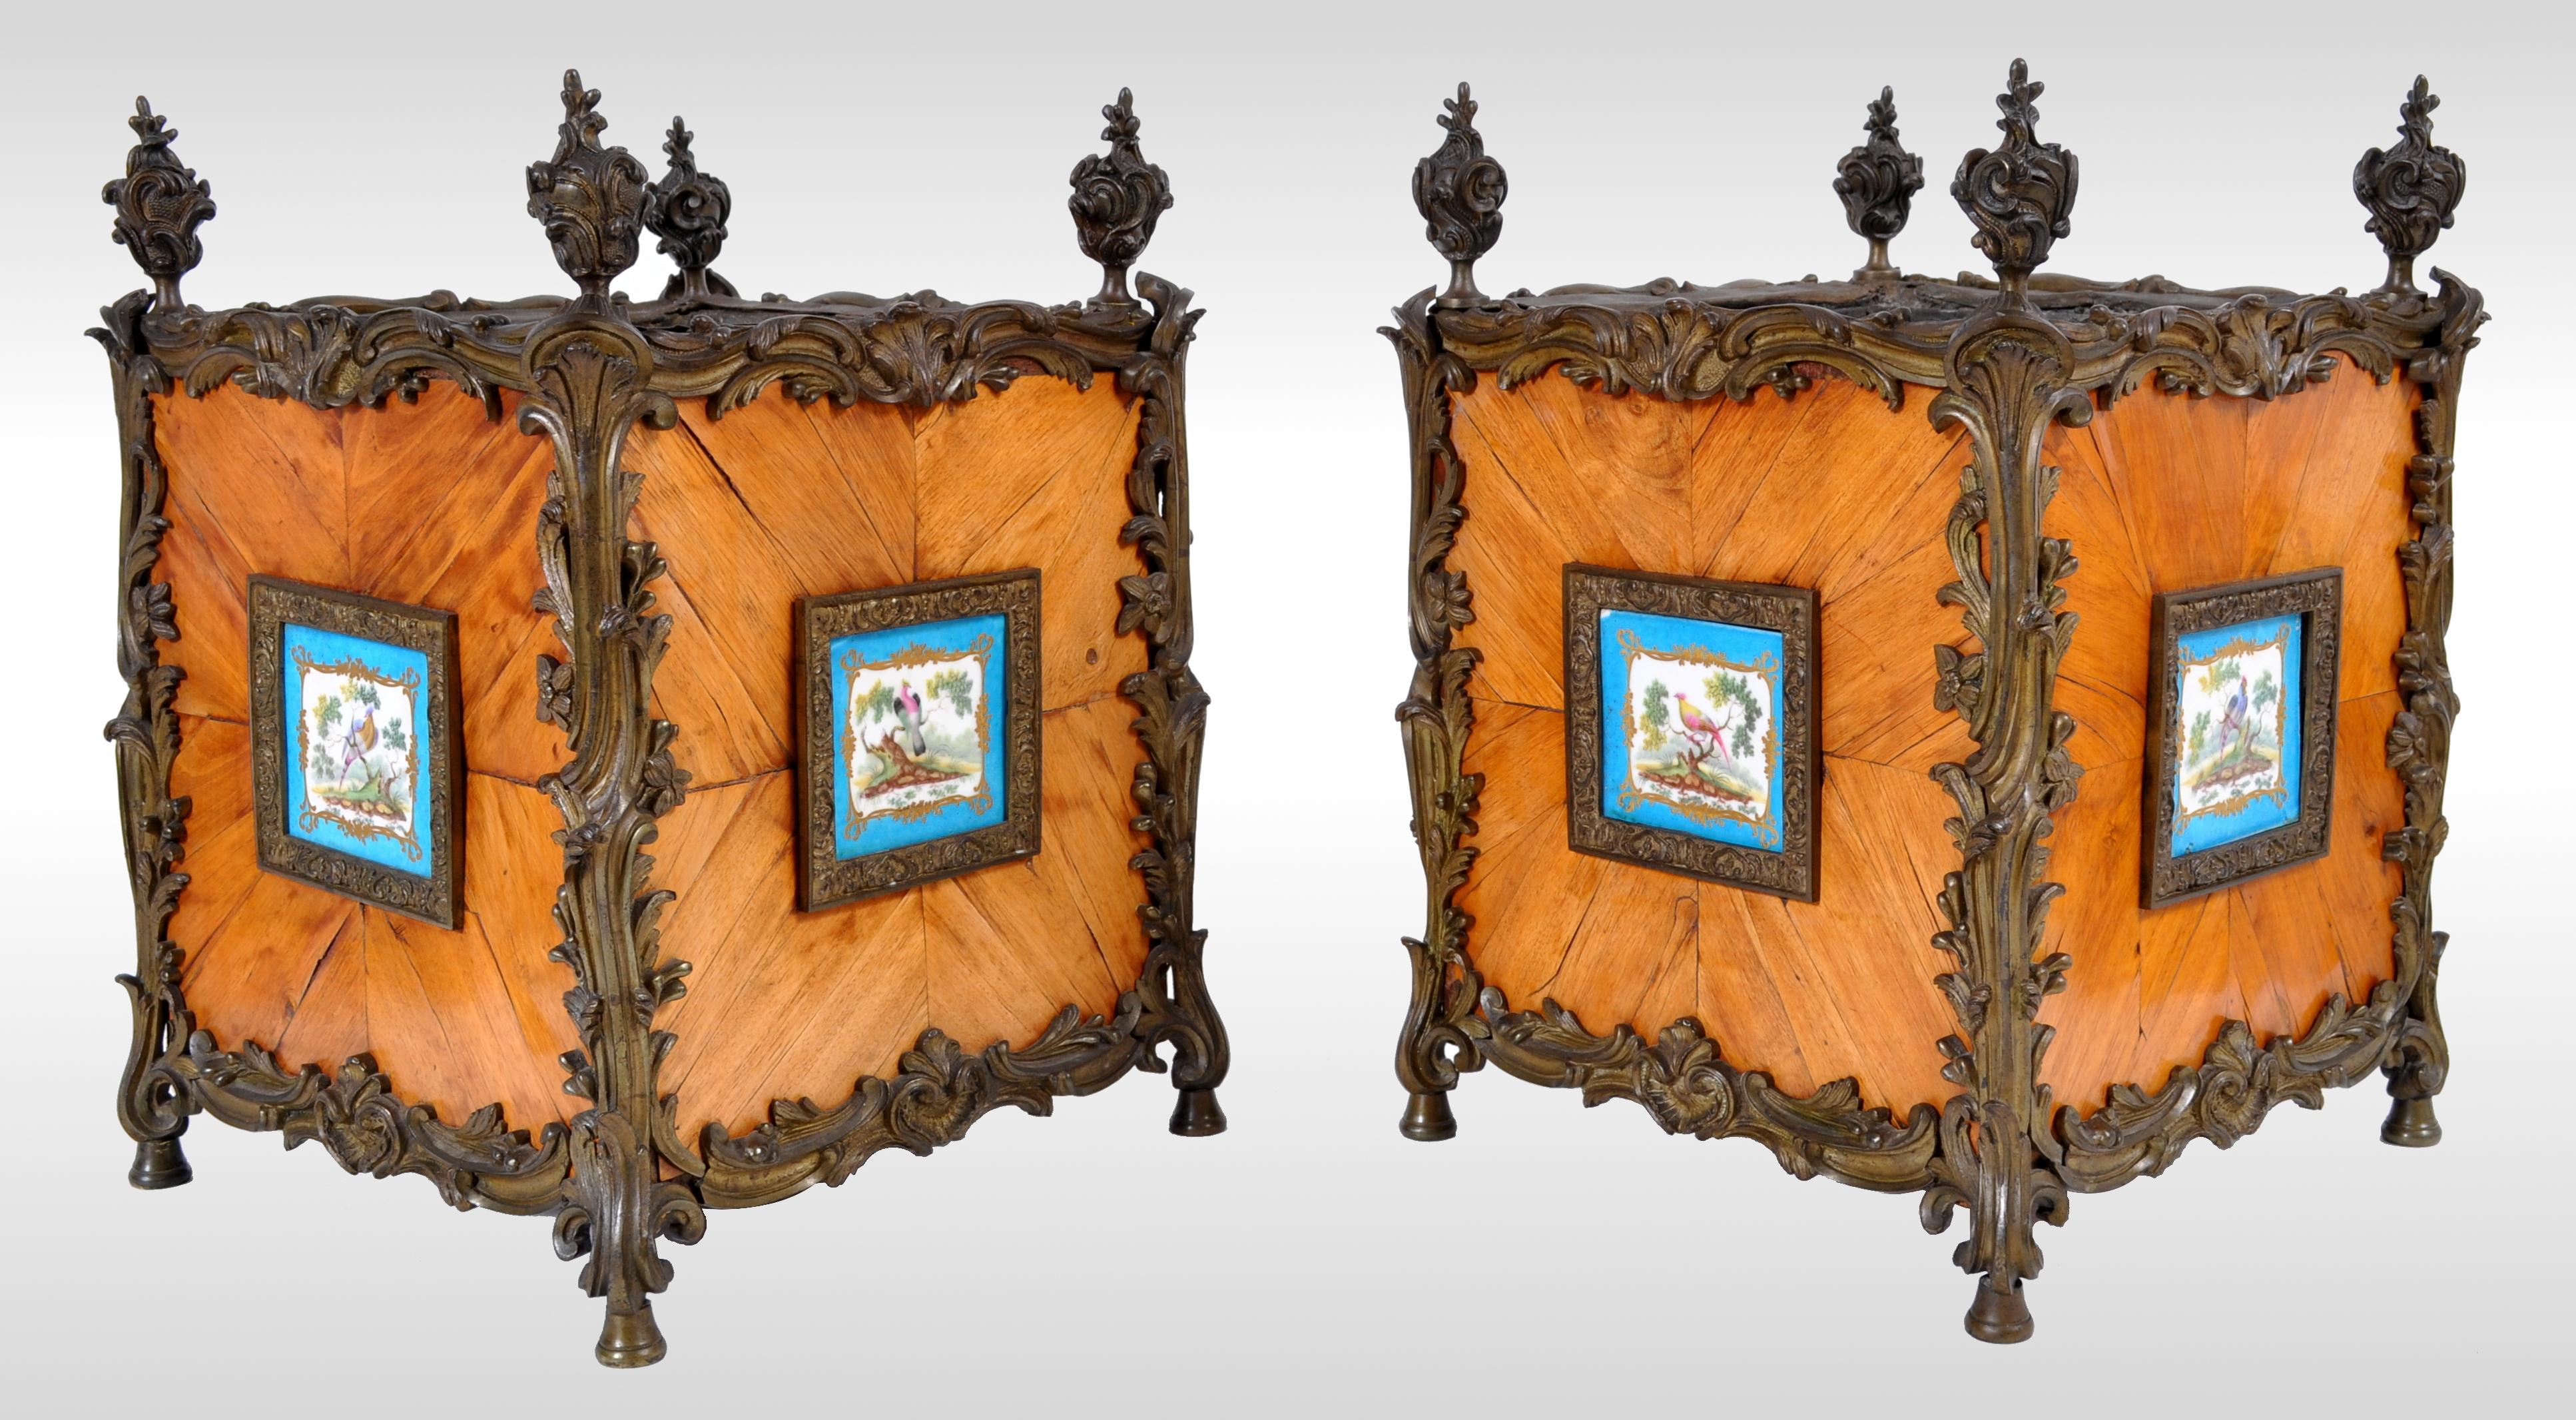 Pair of antique French Louis XV Tulipwood and Sèvres Porcelain jardinières / Planters, circa 1870. The planters having bronze flame finials and Rococo gilded bronze mounts, each side having a feather-banded tulipwood panel inset with Bleu Celeste